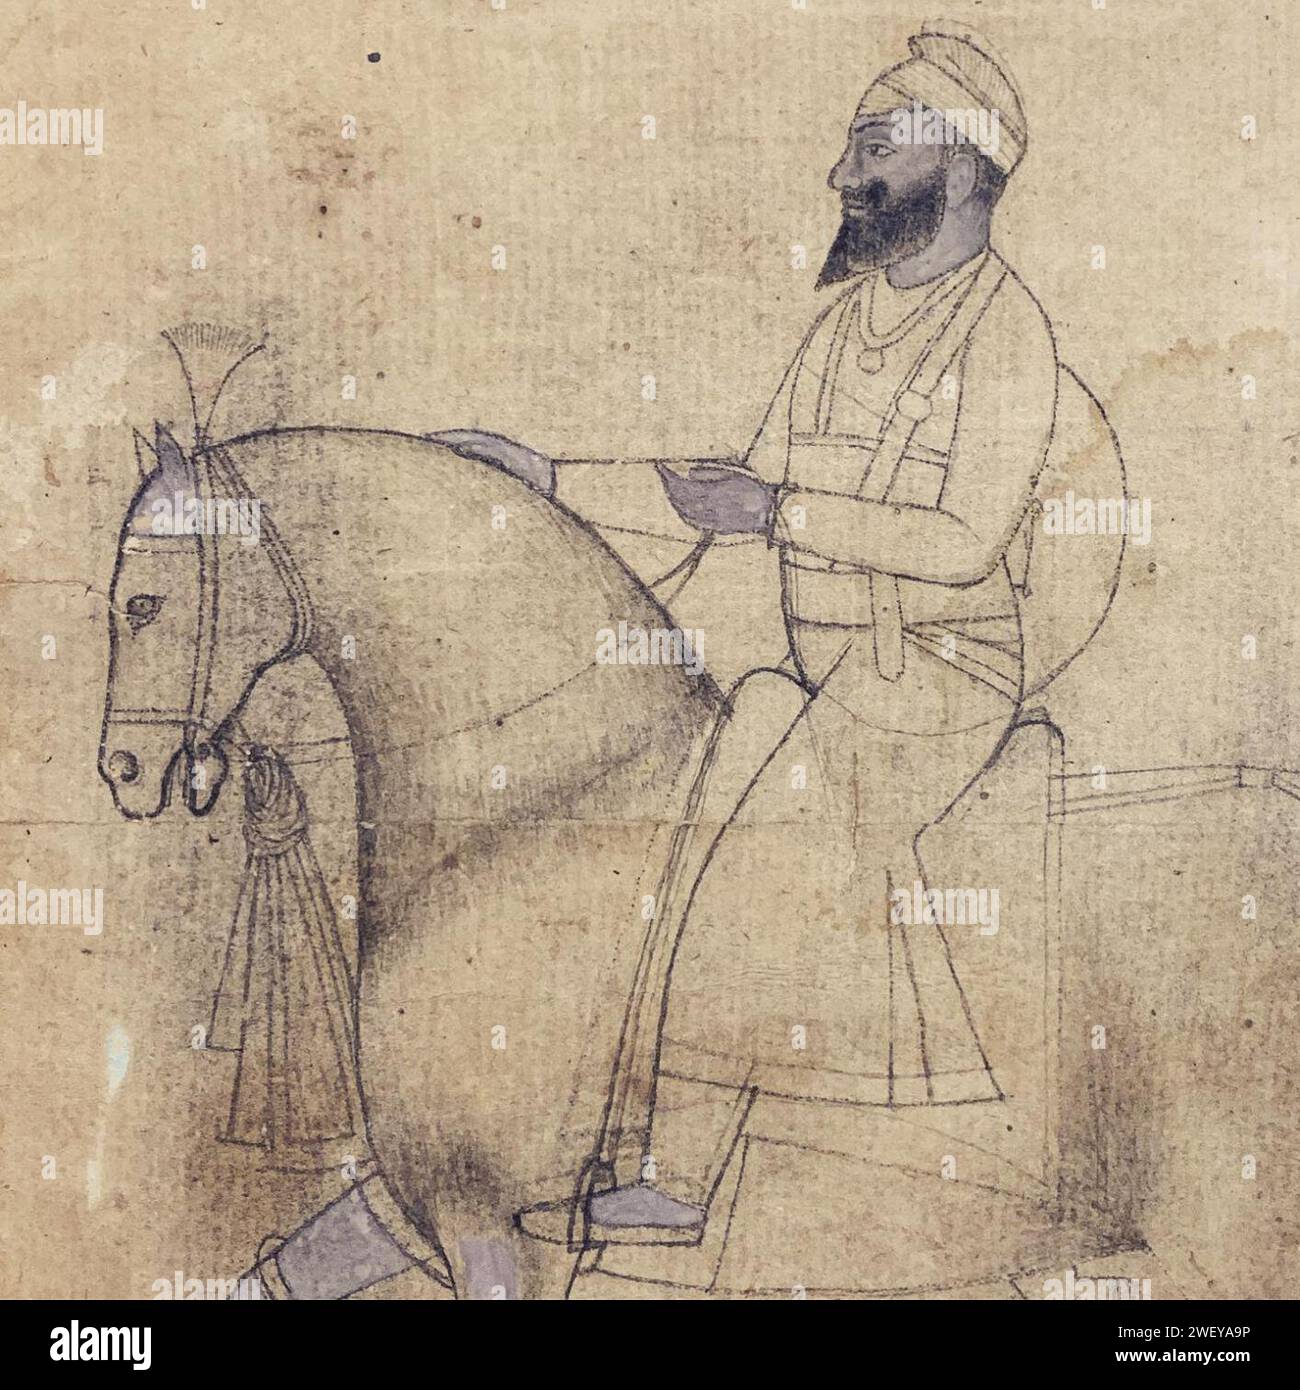 An unfinished miniature of Maharaja Narinder Singh of Patiala State, Patiala, circa 19th century. Stock Photo